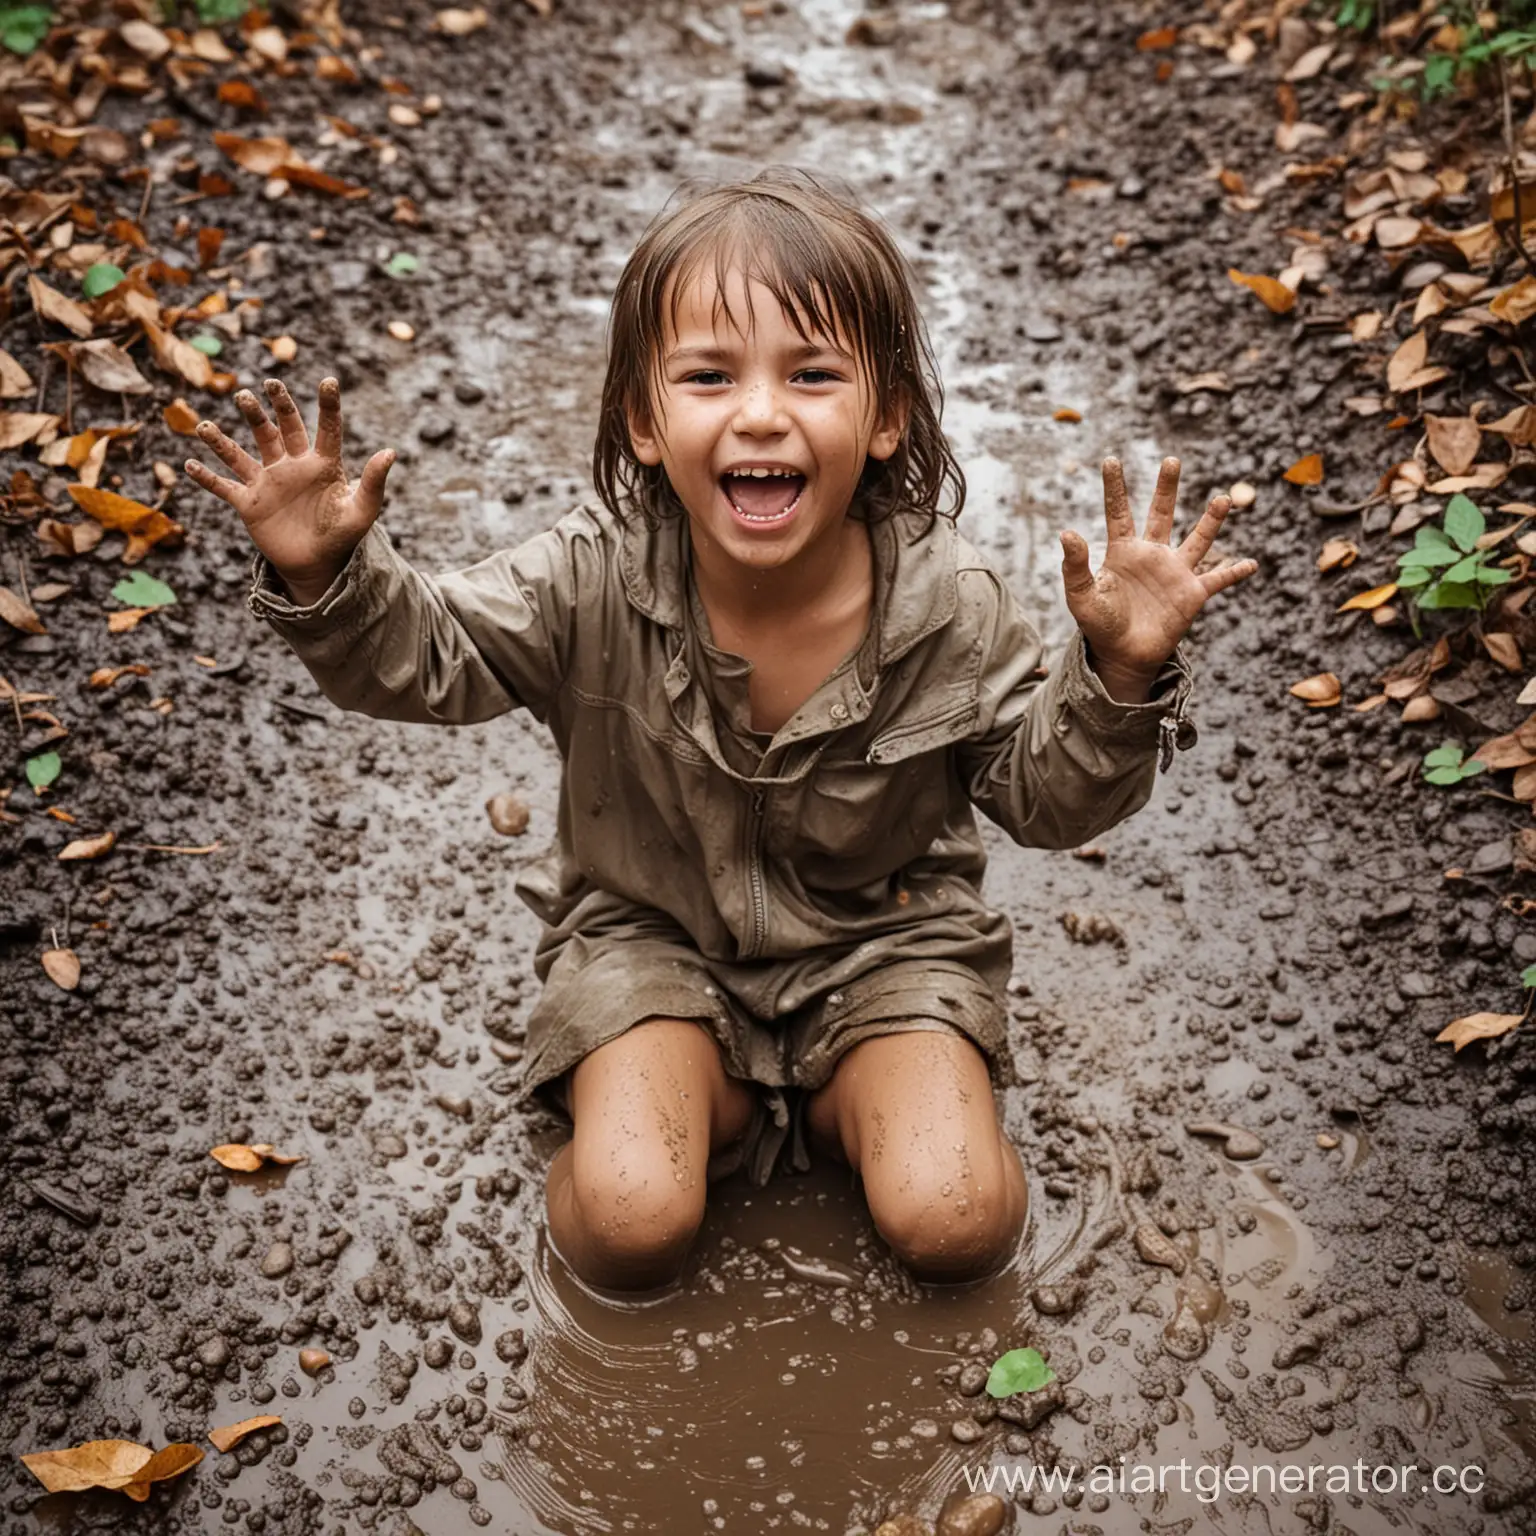 Joyful-Child-Playing-in-Mud-Puddle-with-Leaves-Outdoor-Fun-and-Messy-Adventures